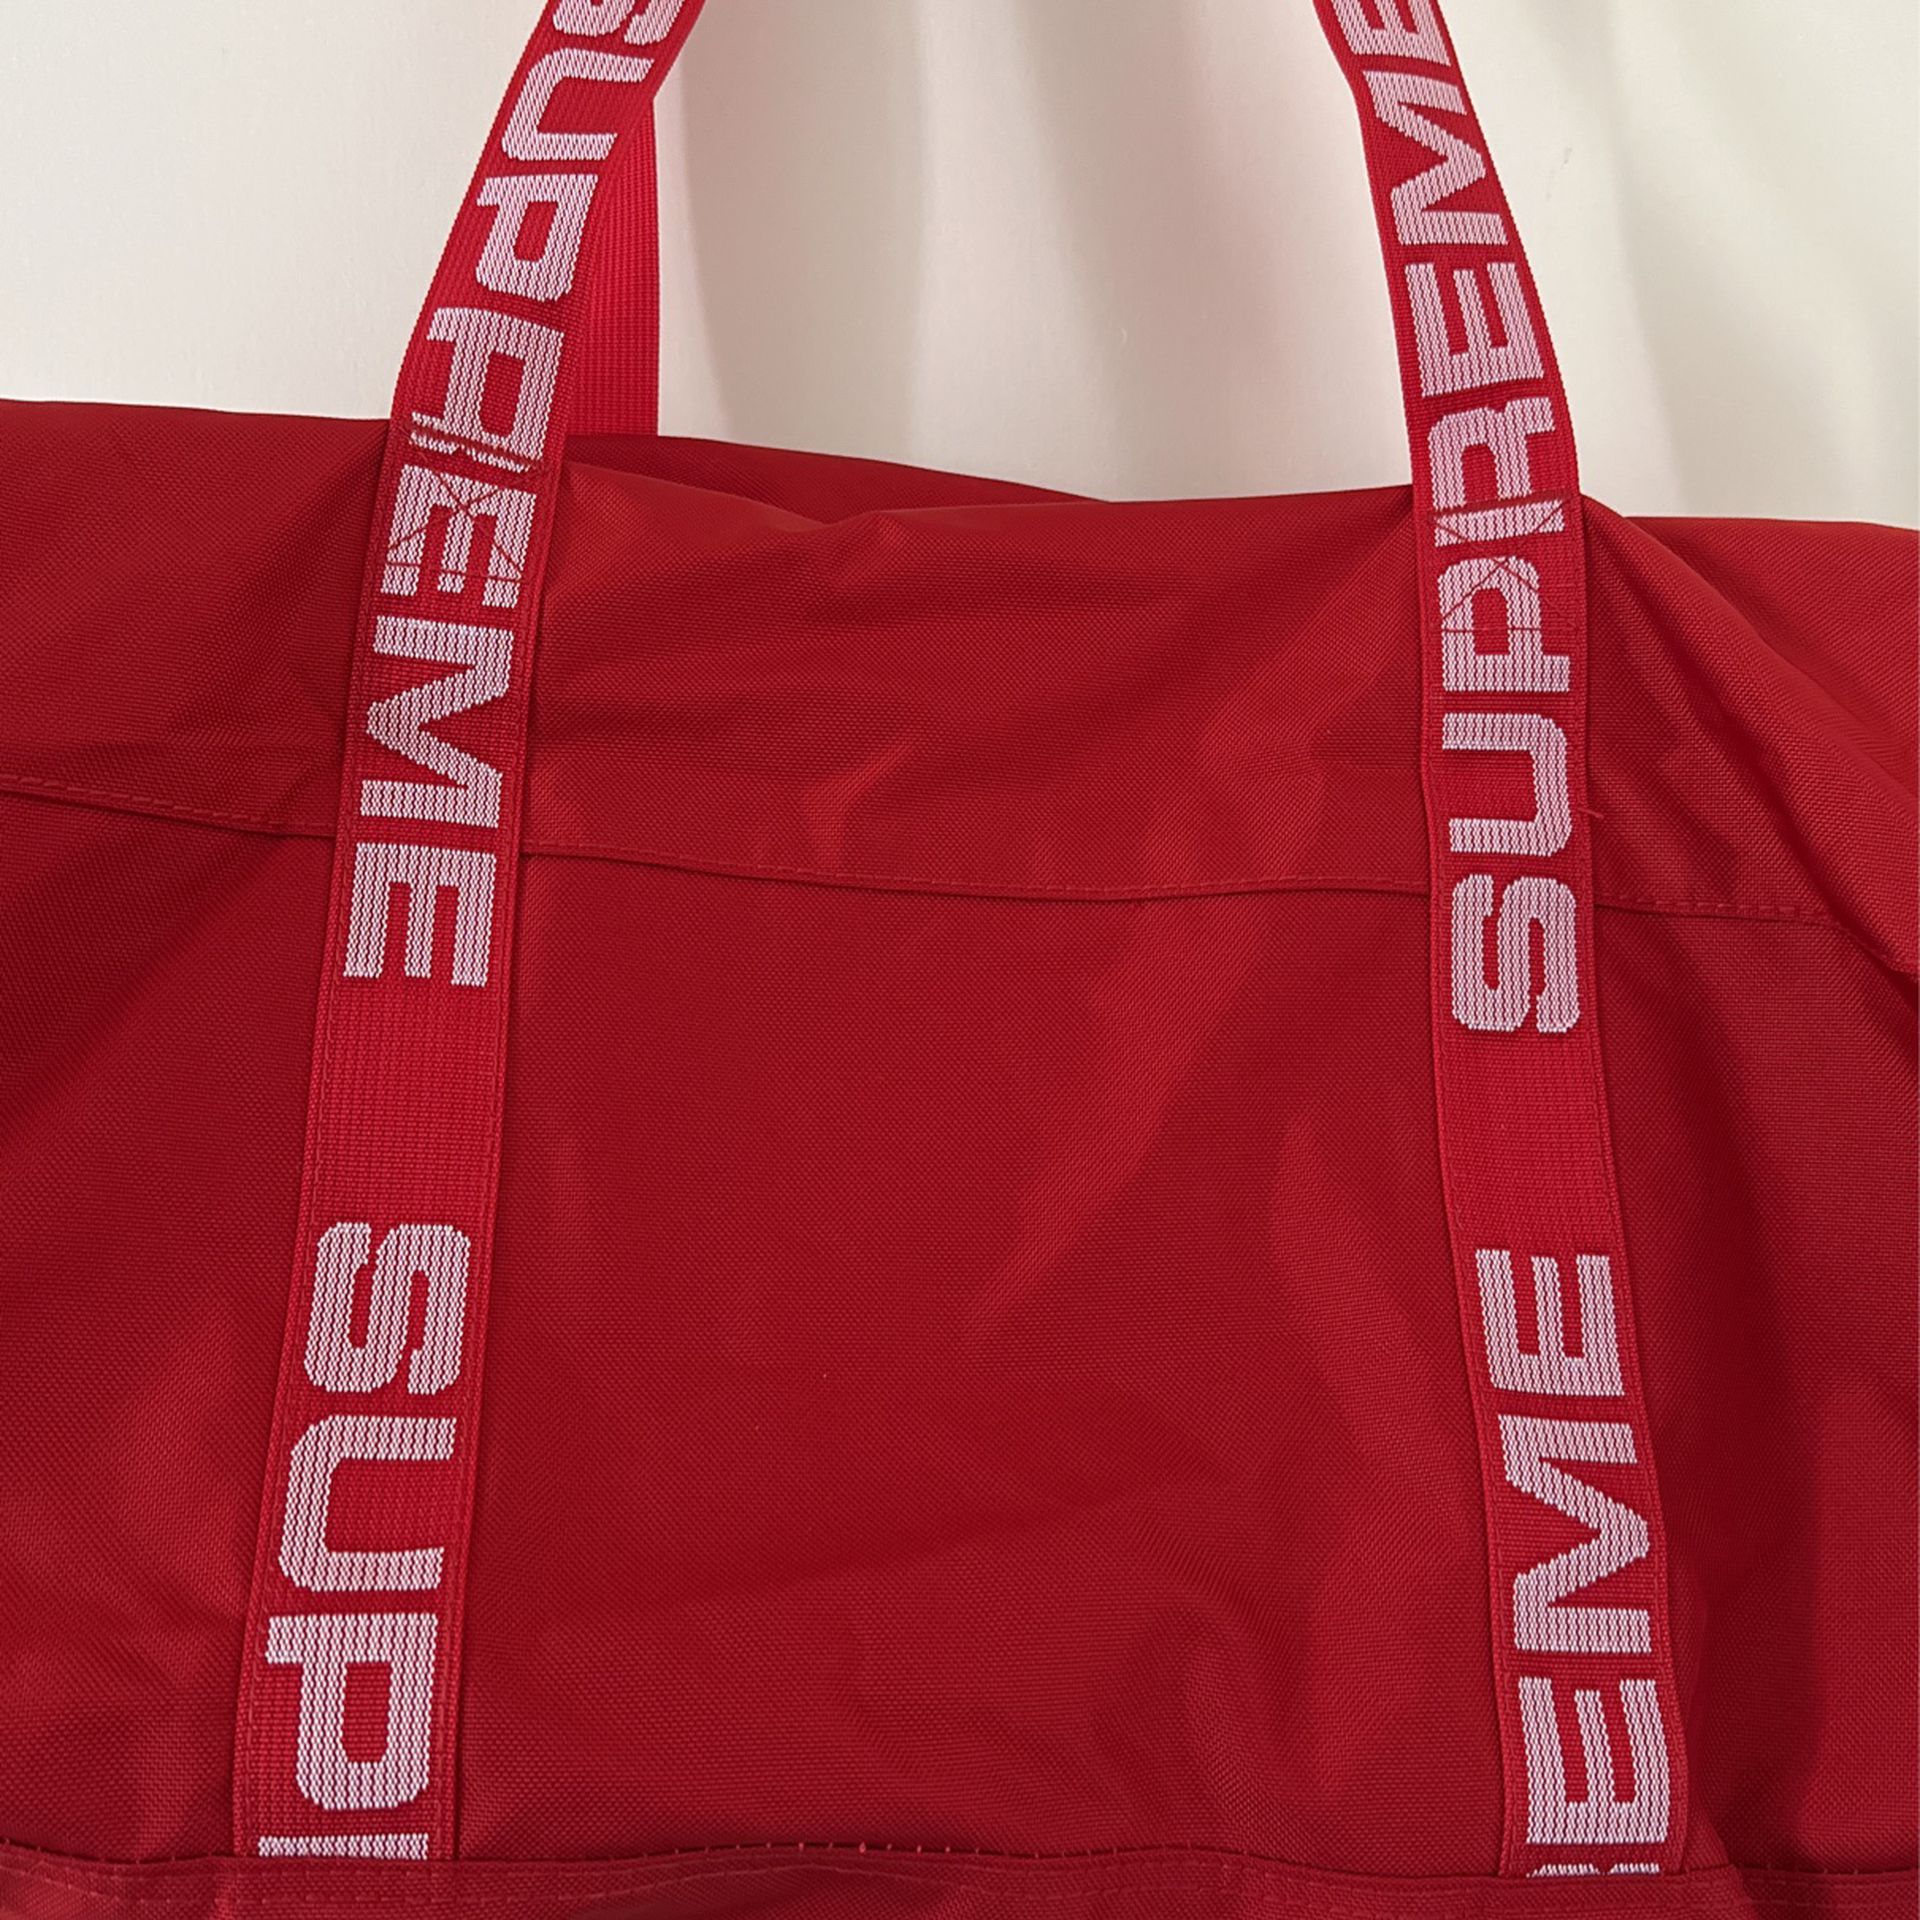 Red Supreme Duffle Bag (ss19) for Sale in Tacoma, WA - OfferUp